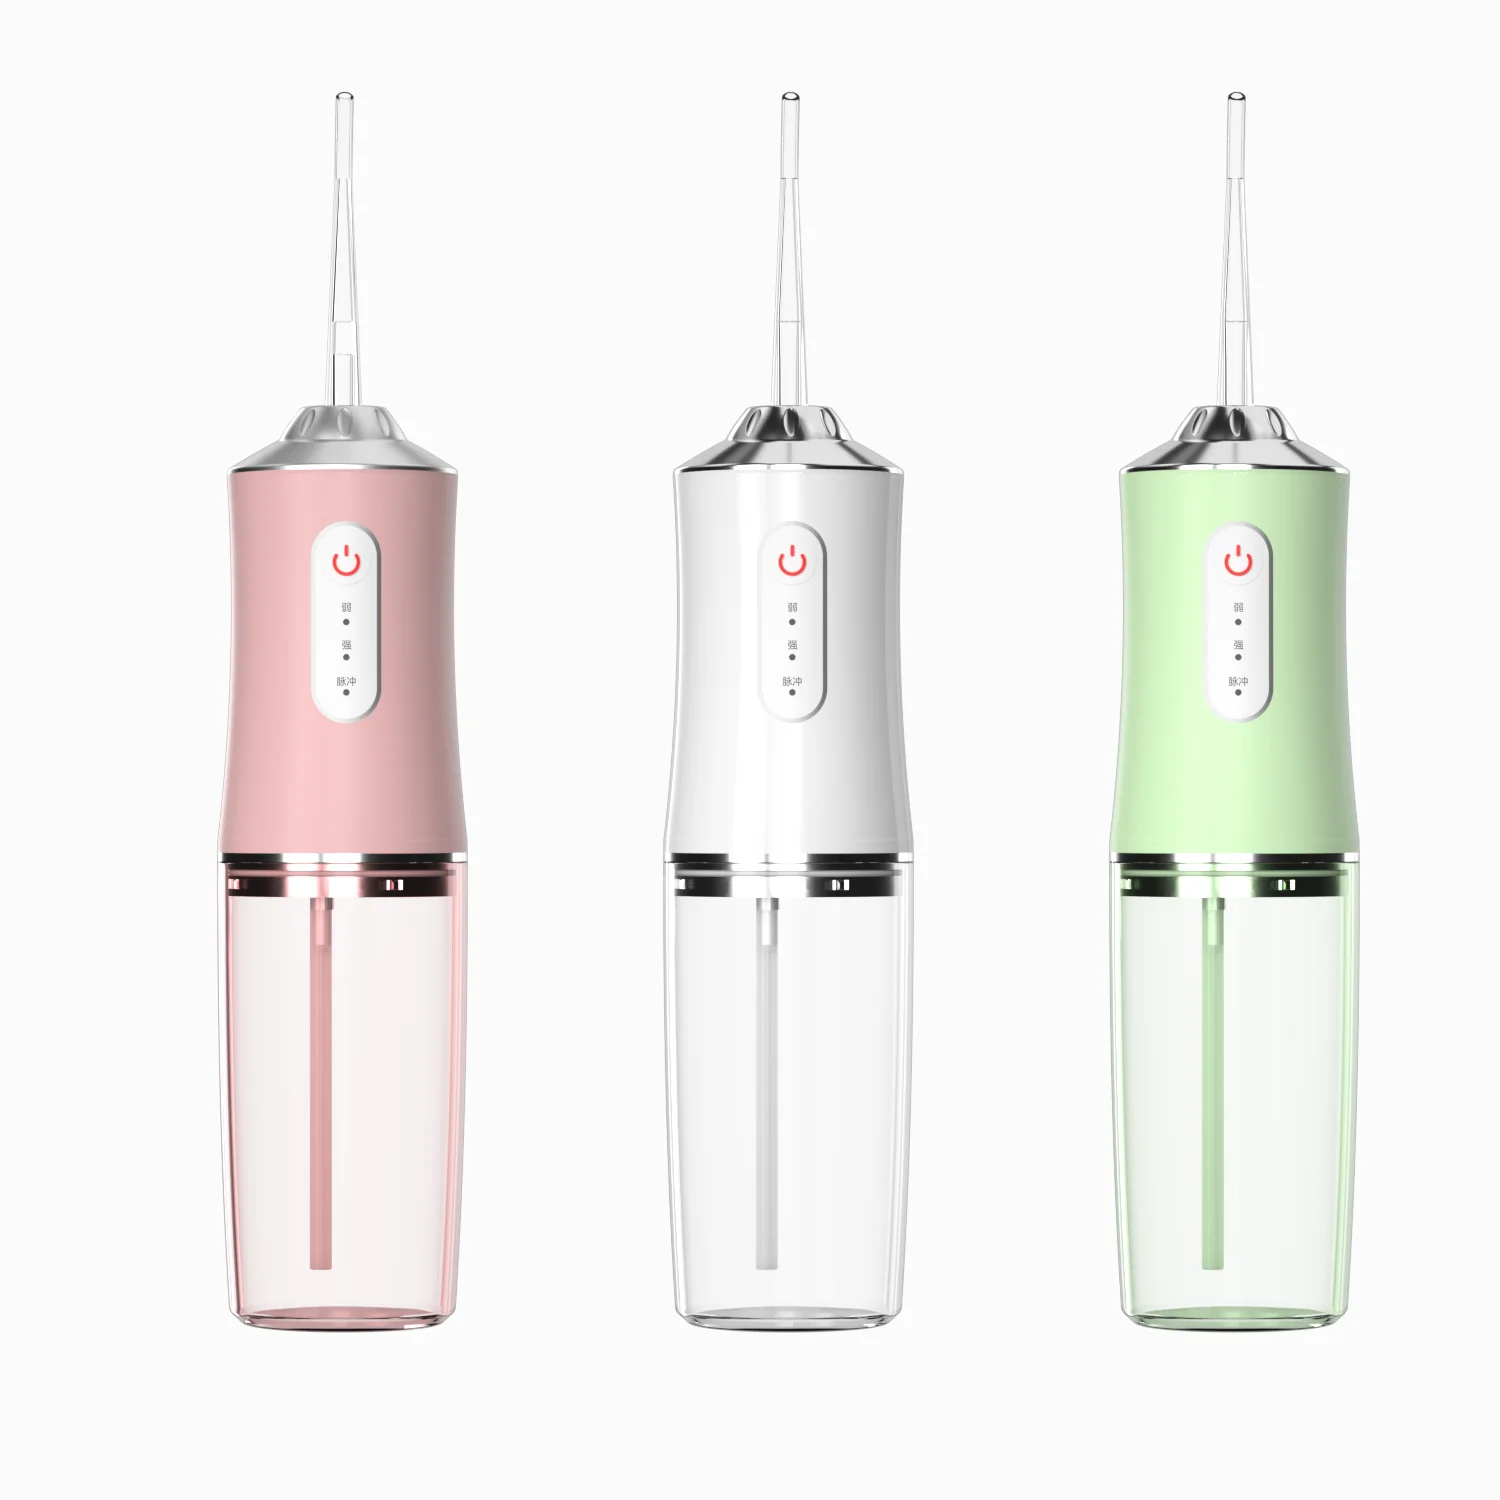 

Teeth Cleaner Detachable USB Charging Cordless Portable Electric Dental Floss Oral Care Irrigator Mini Water Flosser